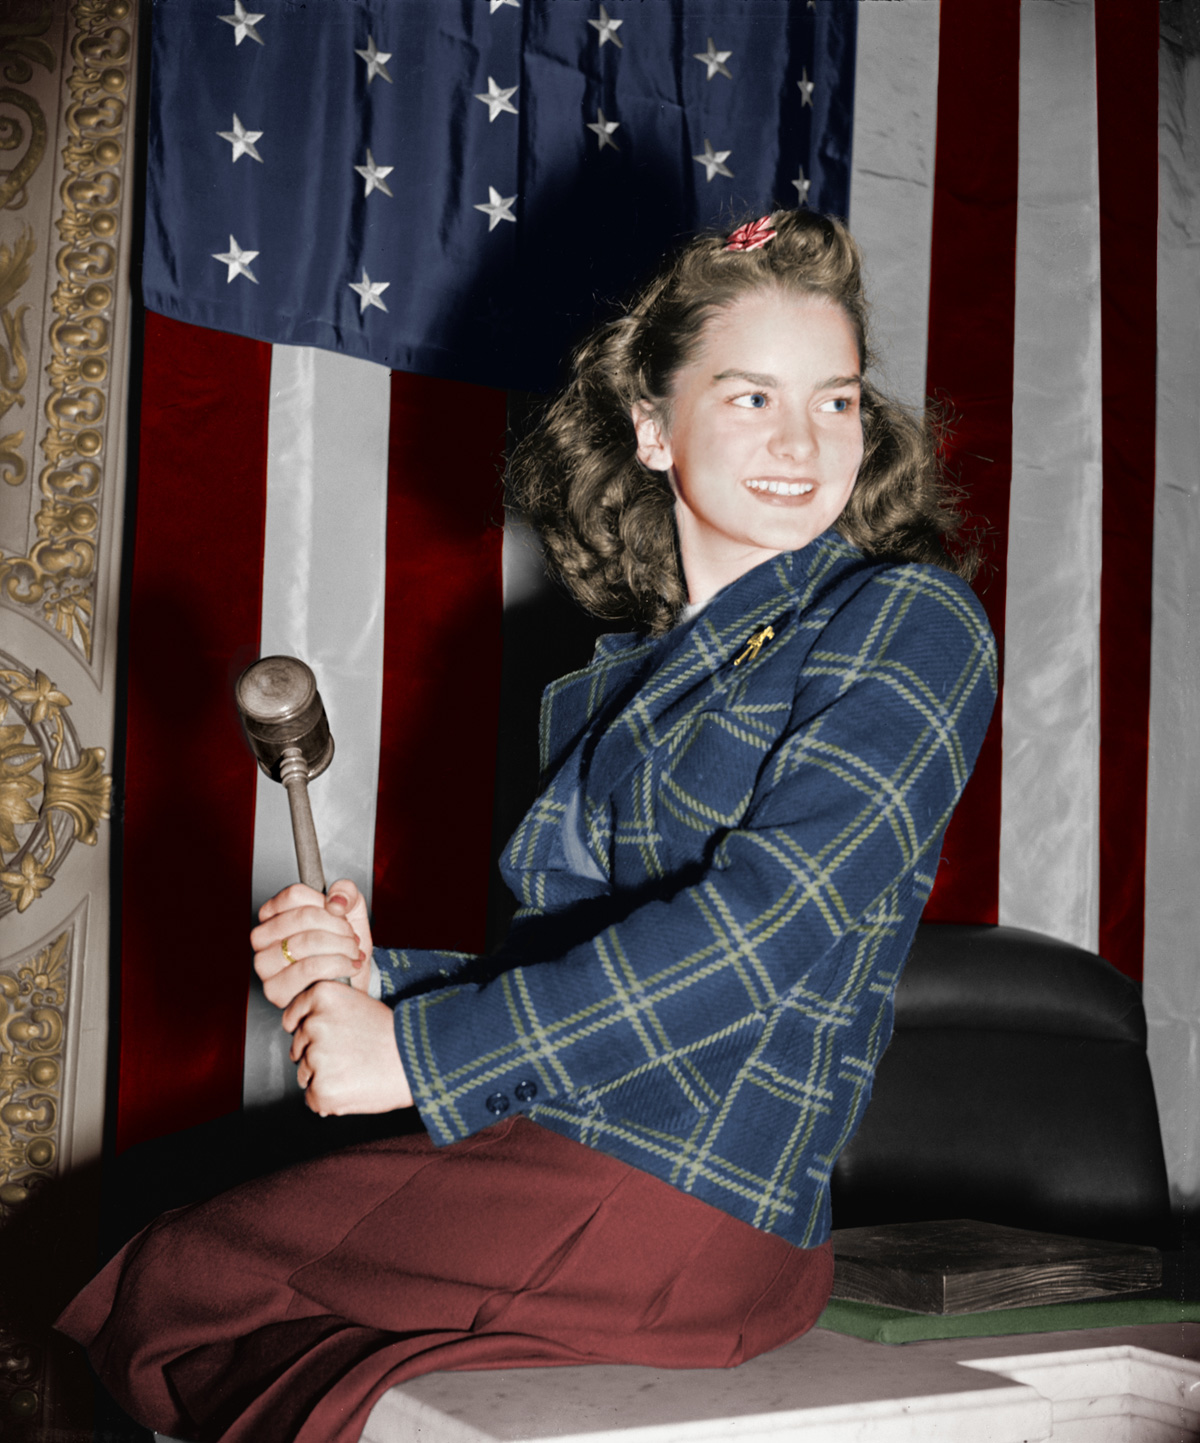 The first female page in the National House of Representatives, 1939. She is the daughter of Rep. Cox of Georgia. A colorized version of a photo from the Harris & Ewing Collection (Library of Congress).